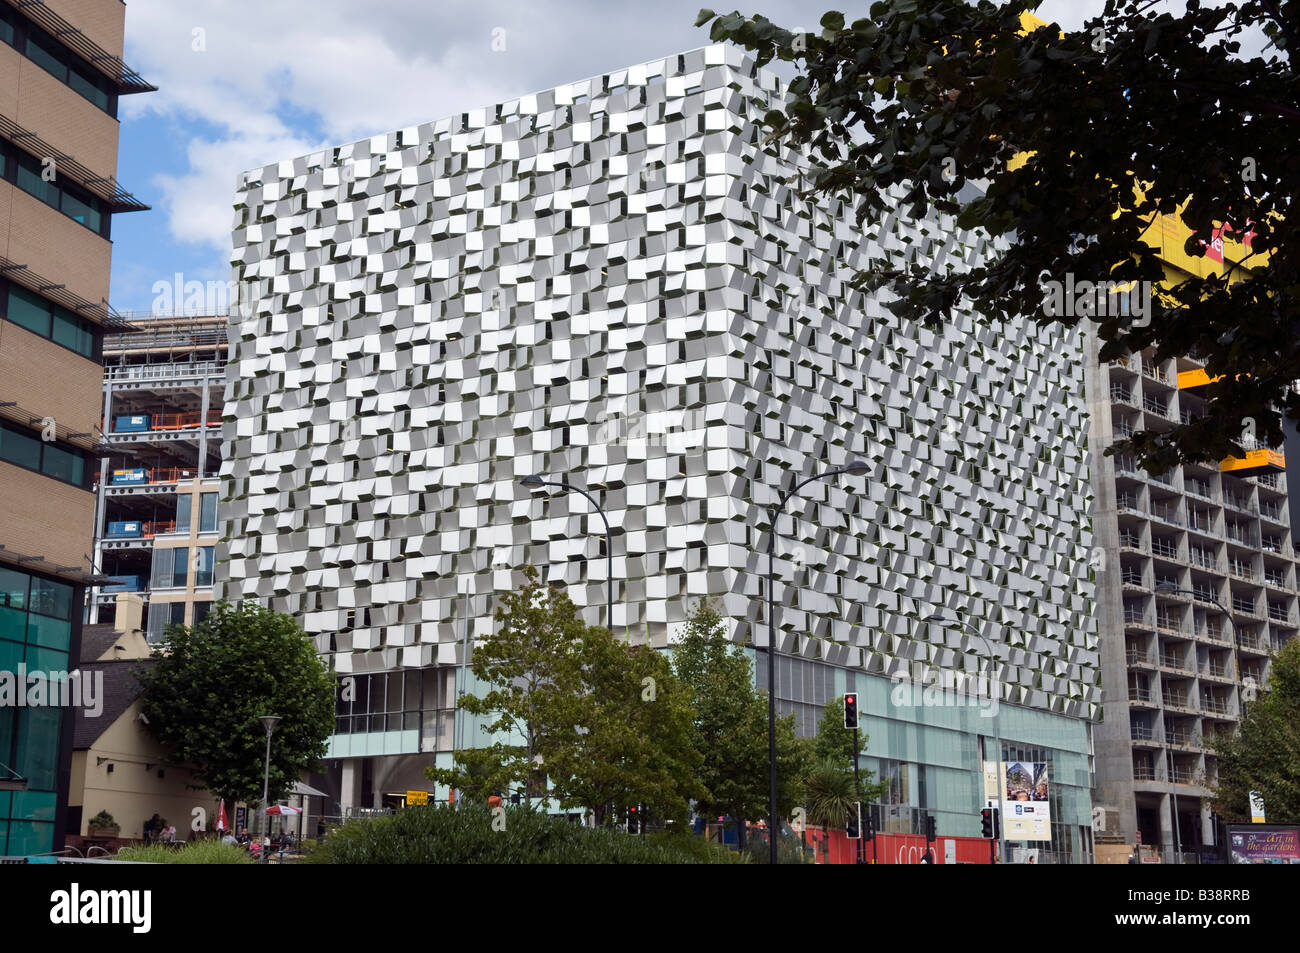 'Q park' the new multi story car park on Arundel Gate in Sheffield 'Great Britain' Stock Photo